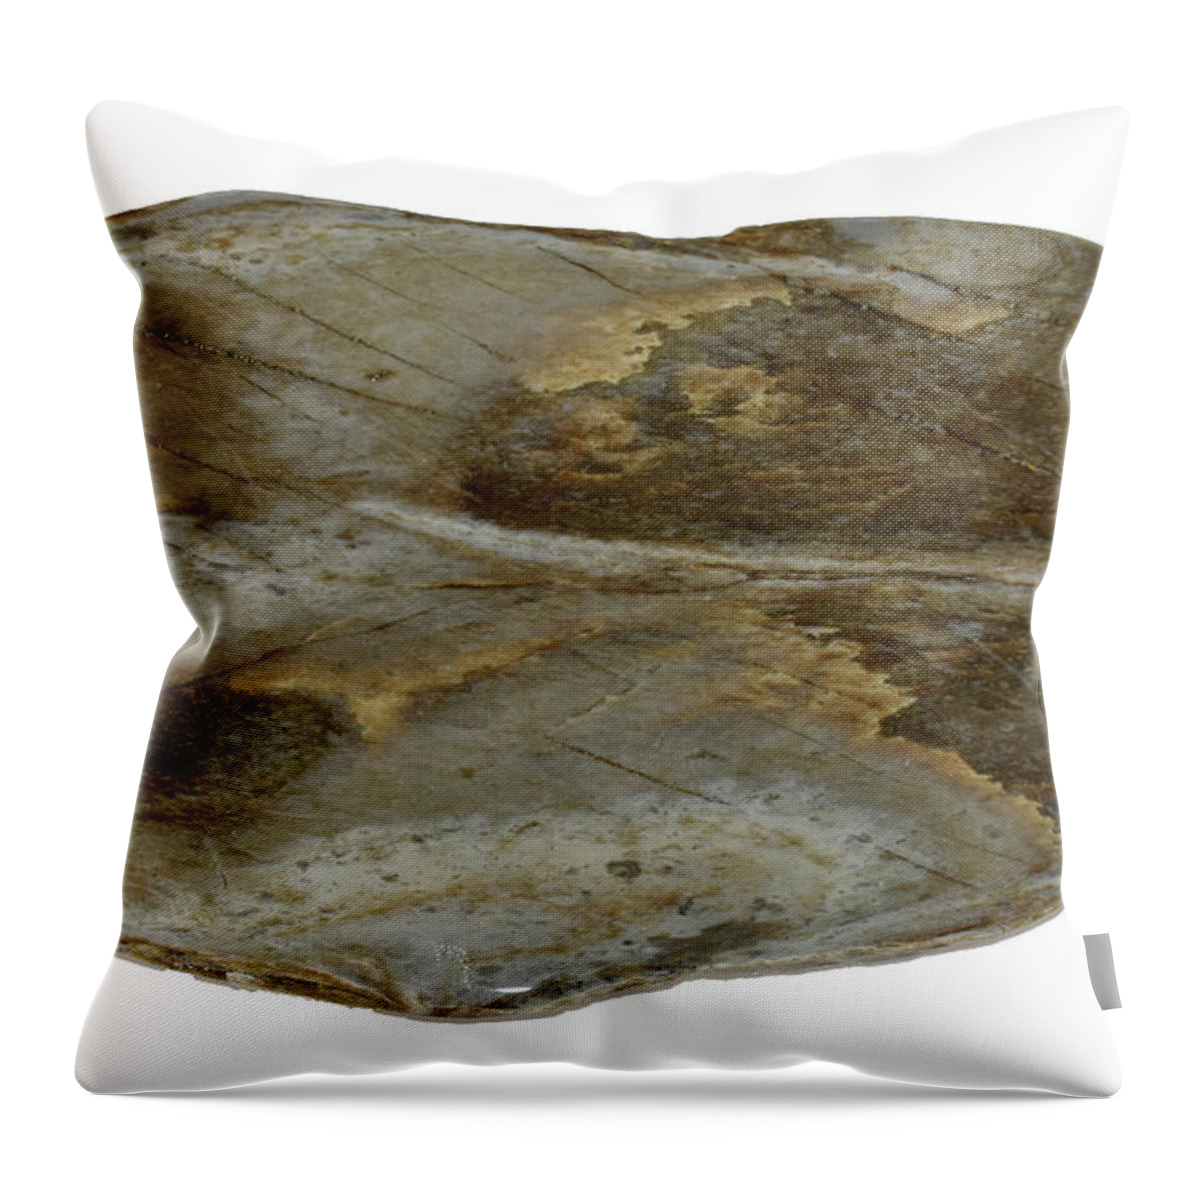 Madoc Rocks Throw Pillow featuring the photograph Mr1012 by Art in a Rock